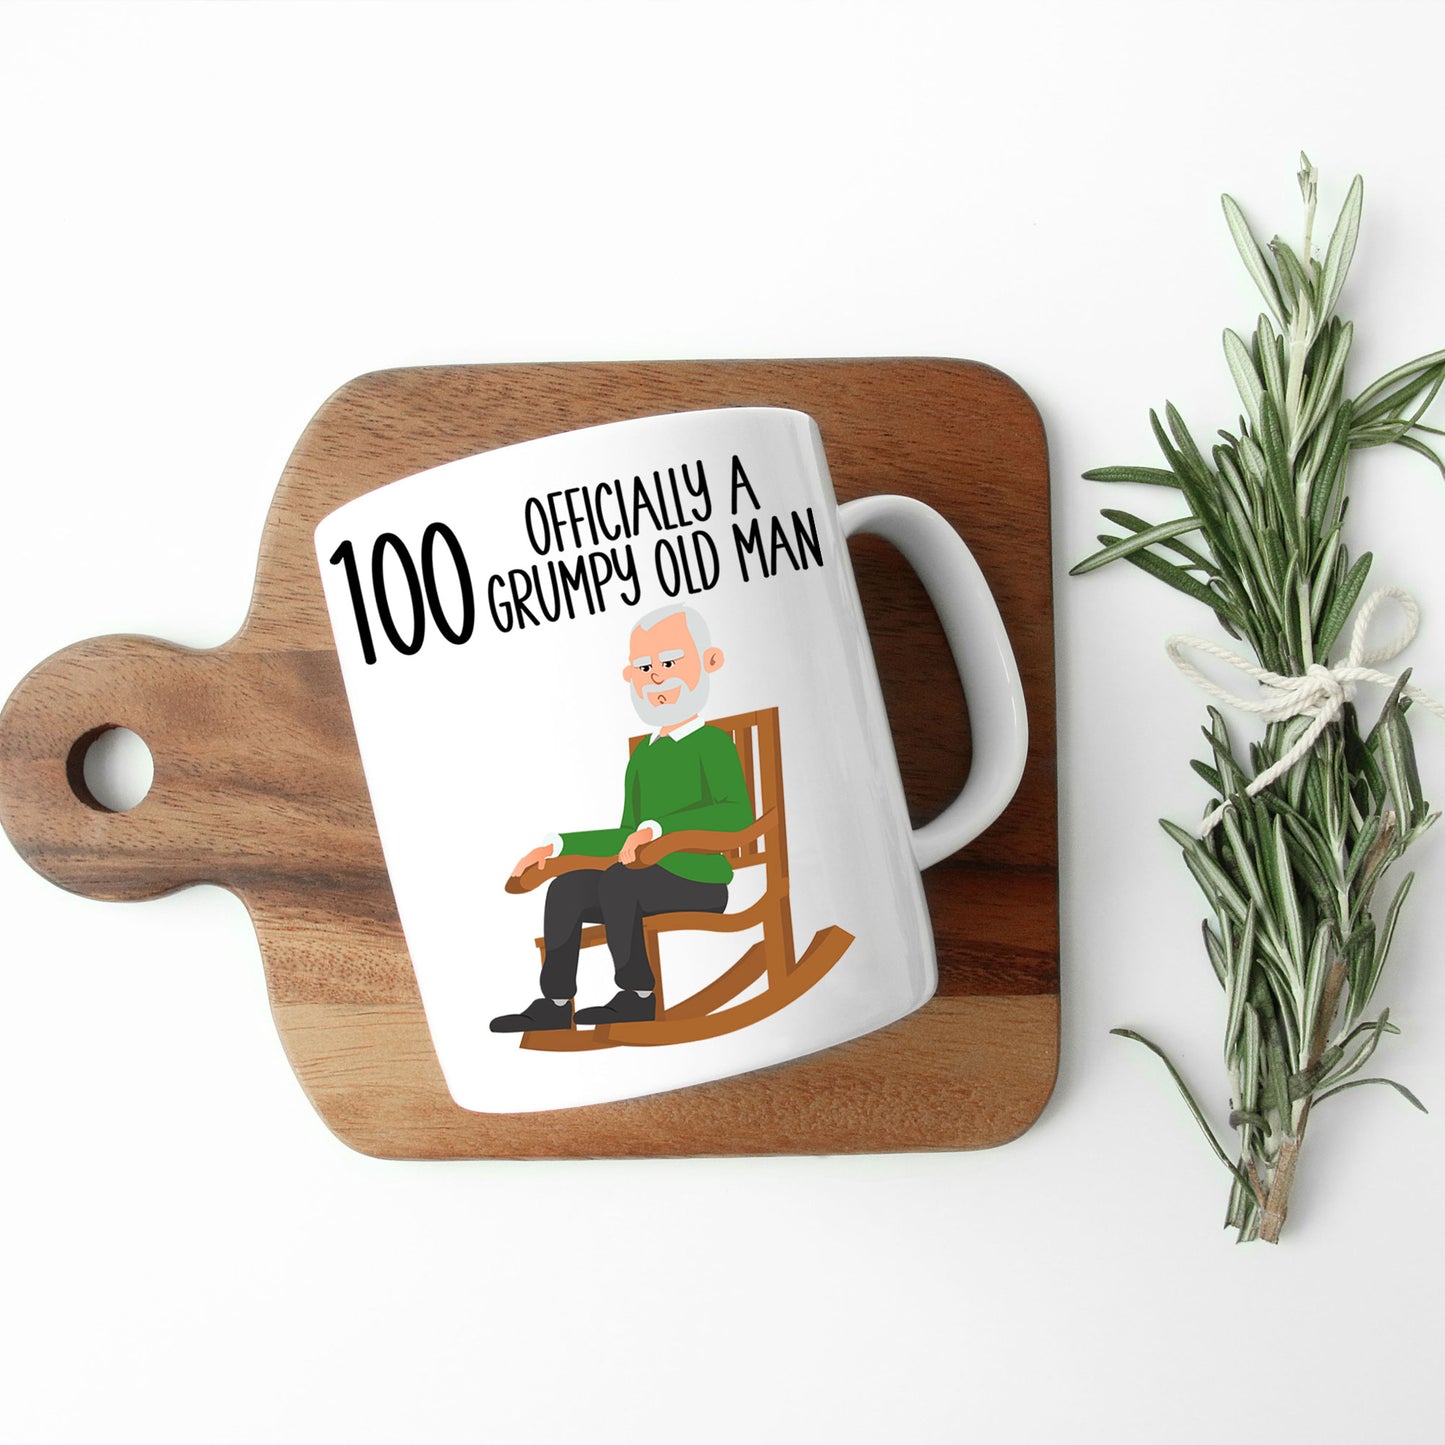 100th Officially A Grumpy Old Man Mug and/or Coaster Gift  - Always Looking Good -   